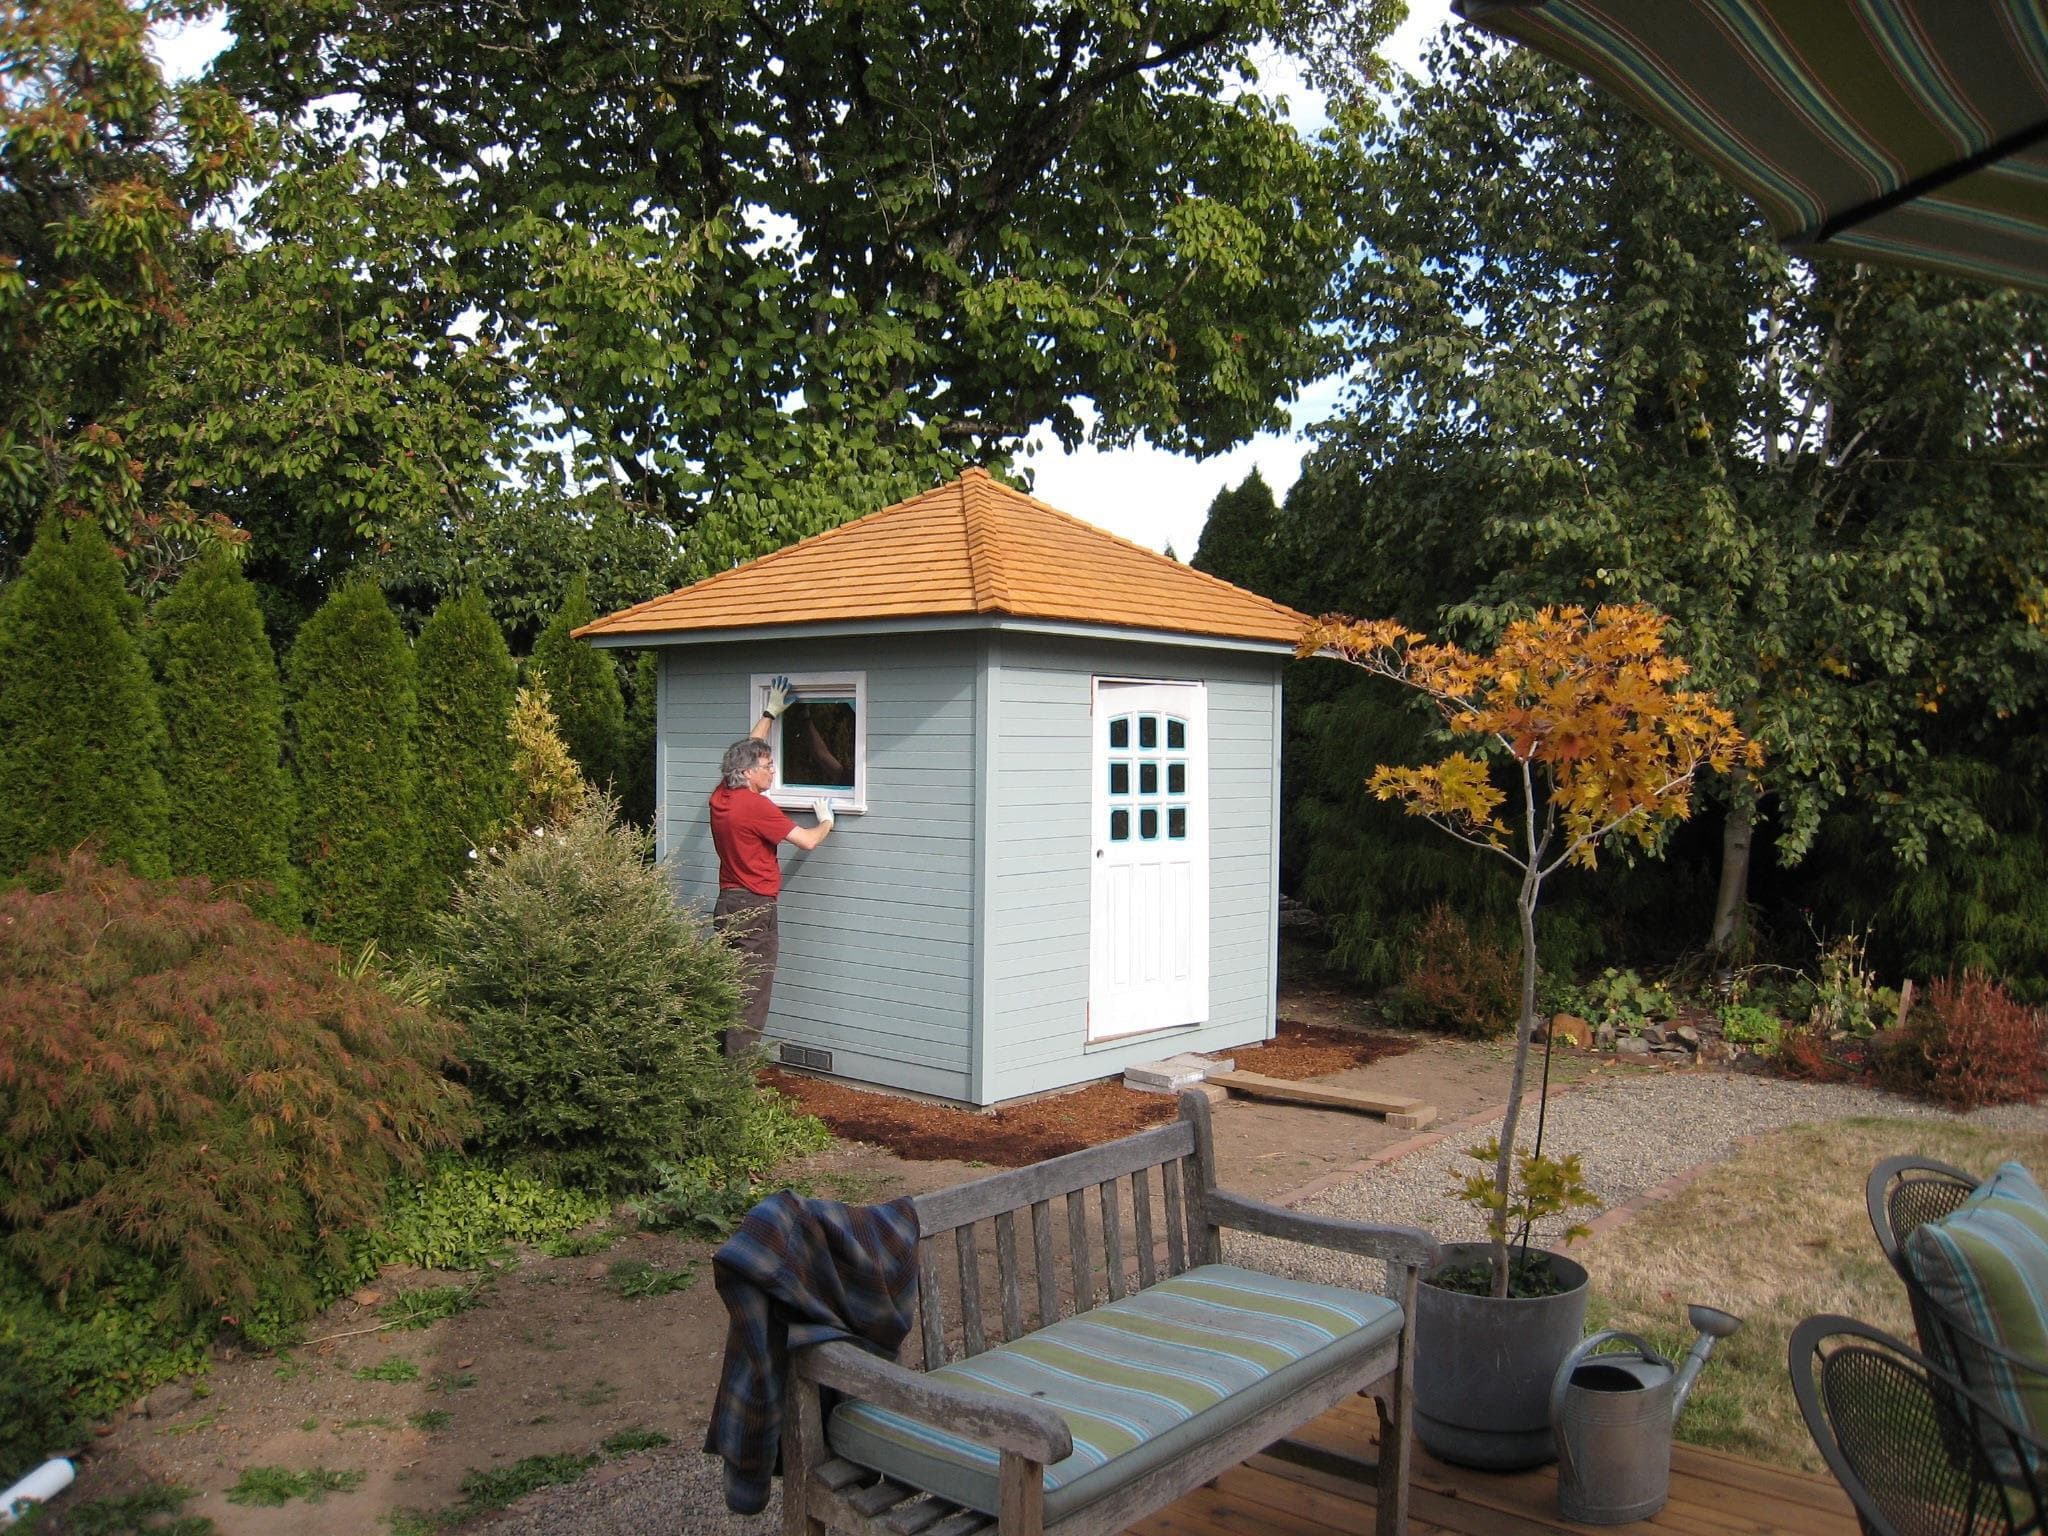 Sonoma 6x8 garden shed with workshop window in Houston Texas. ID number 124280-2